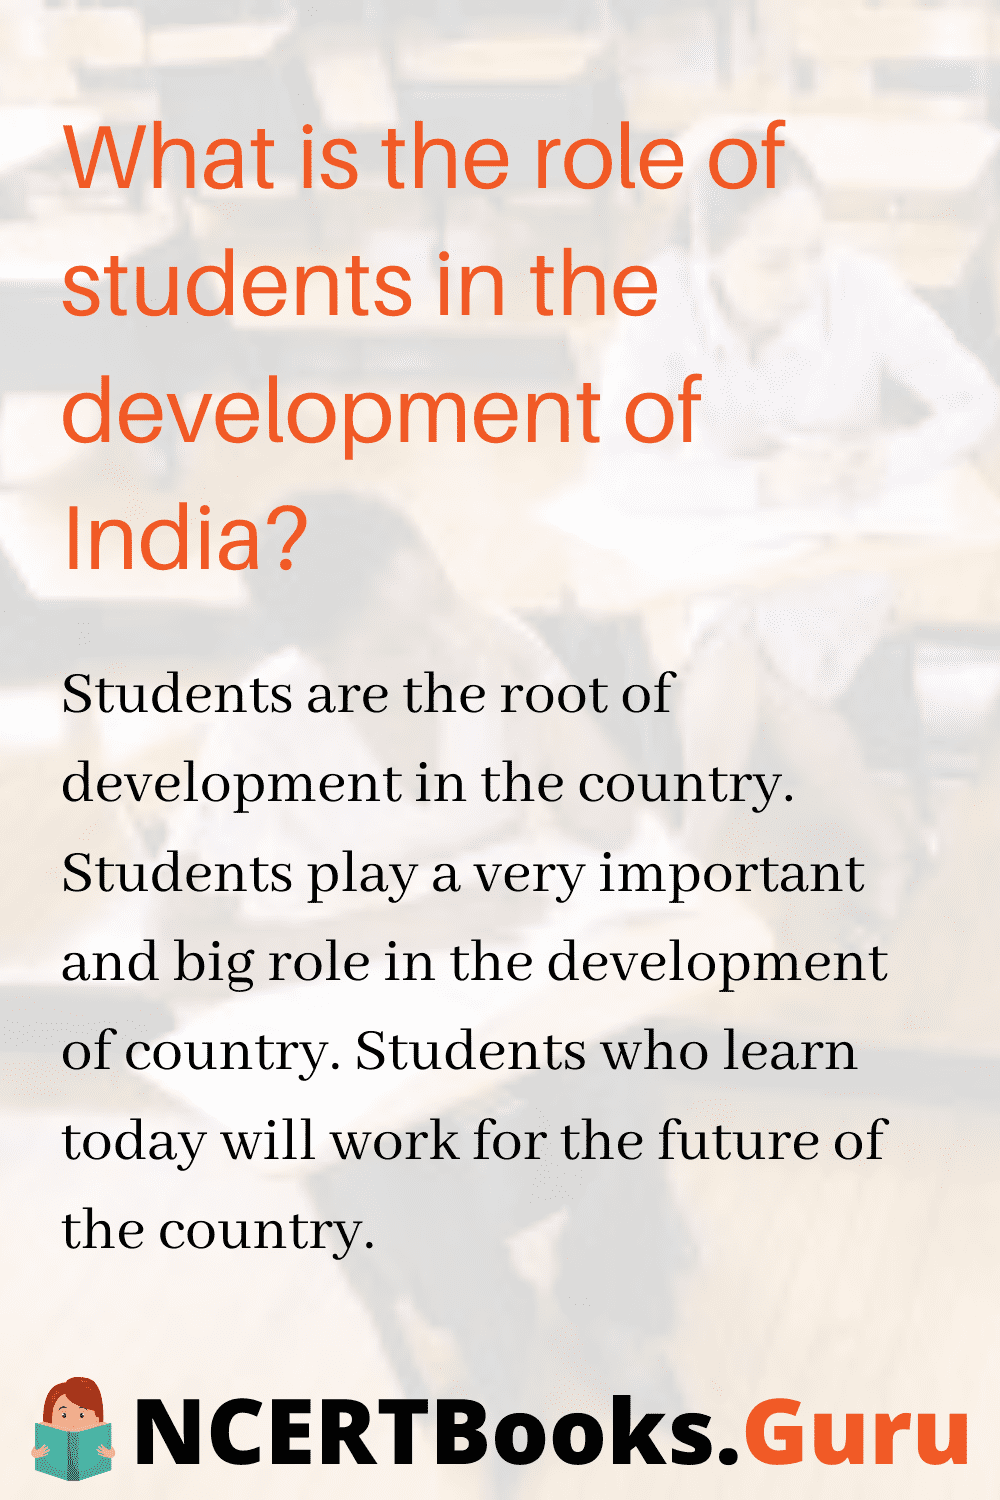 Students Role in the Development of India